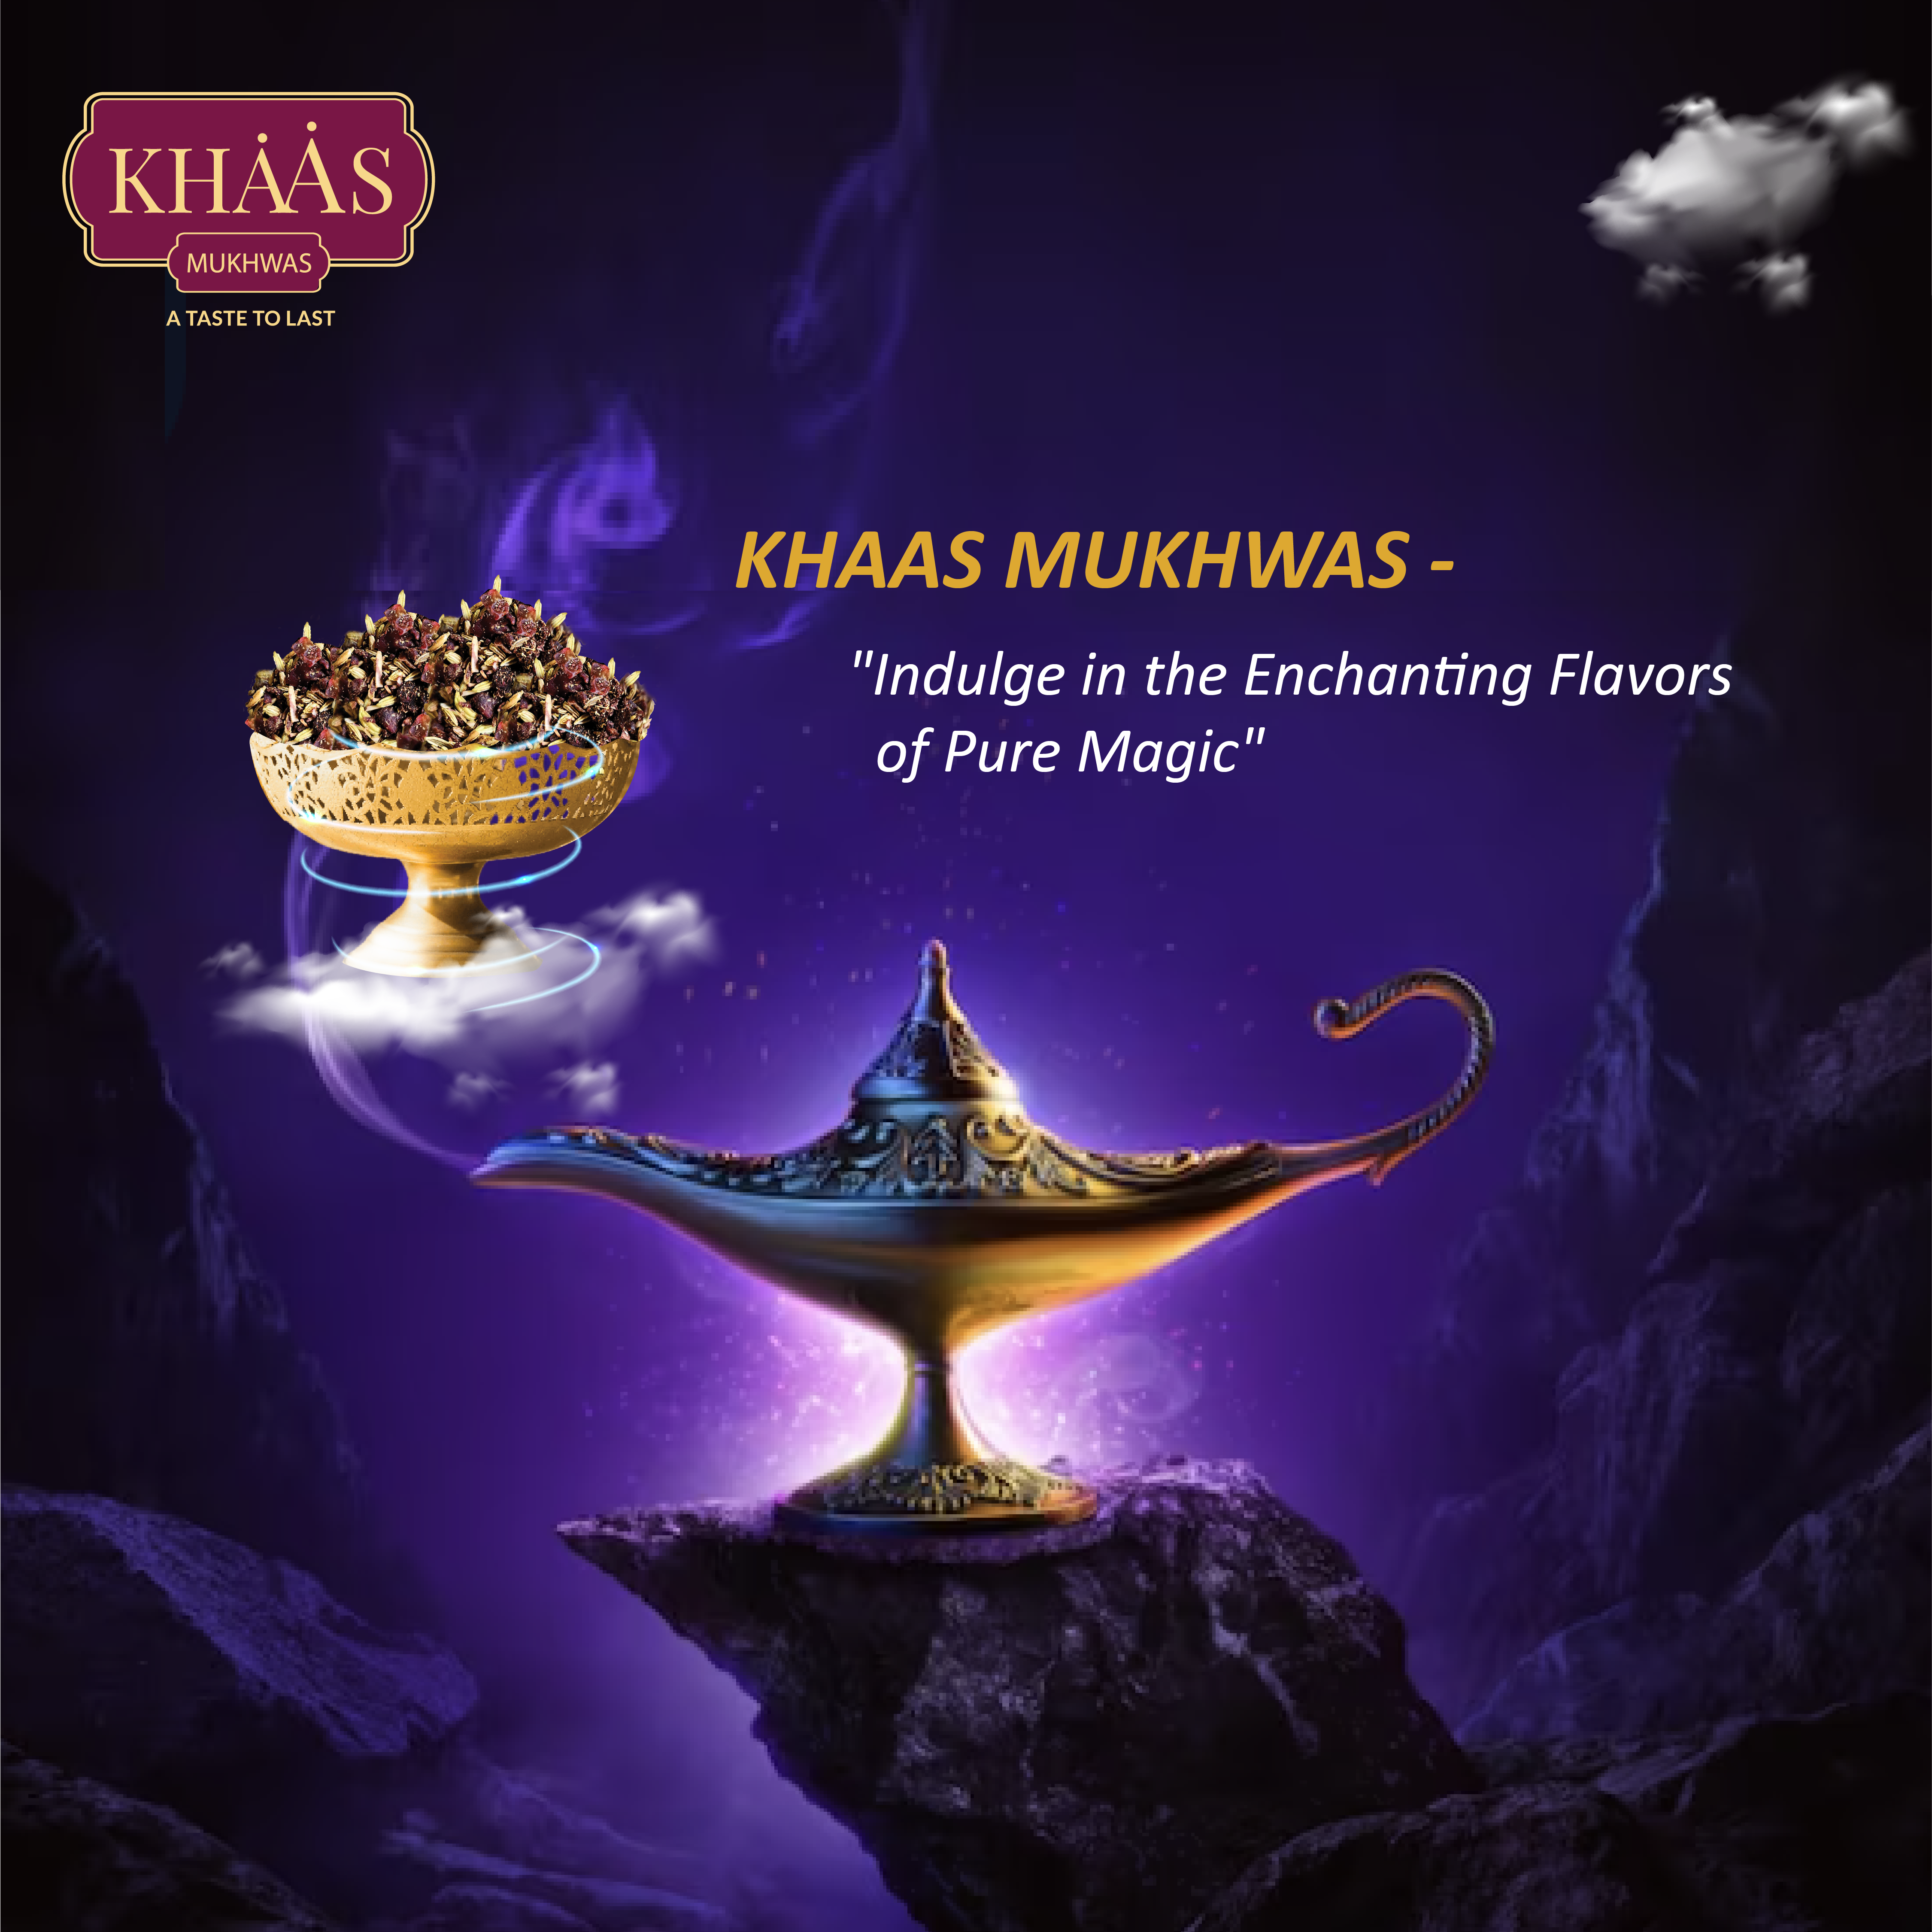 Experience the Magic of Khaas Mukhwas: An All-Natural Mouth Freshener